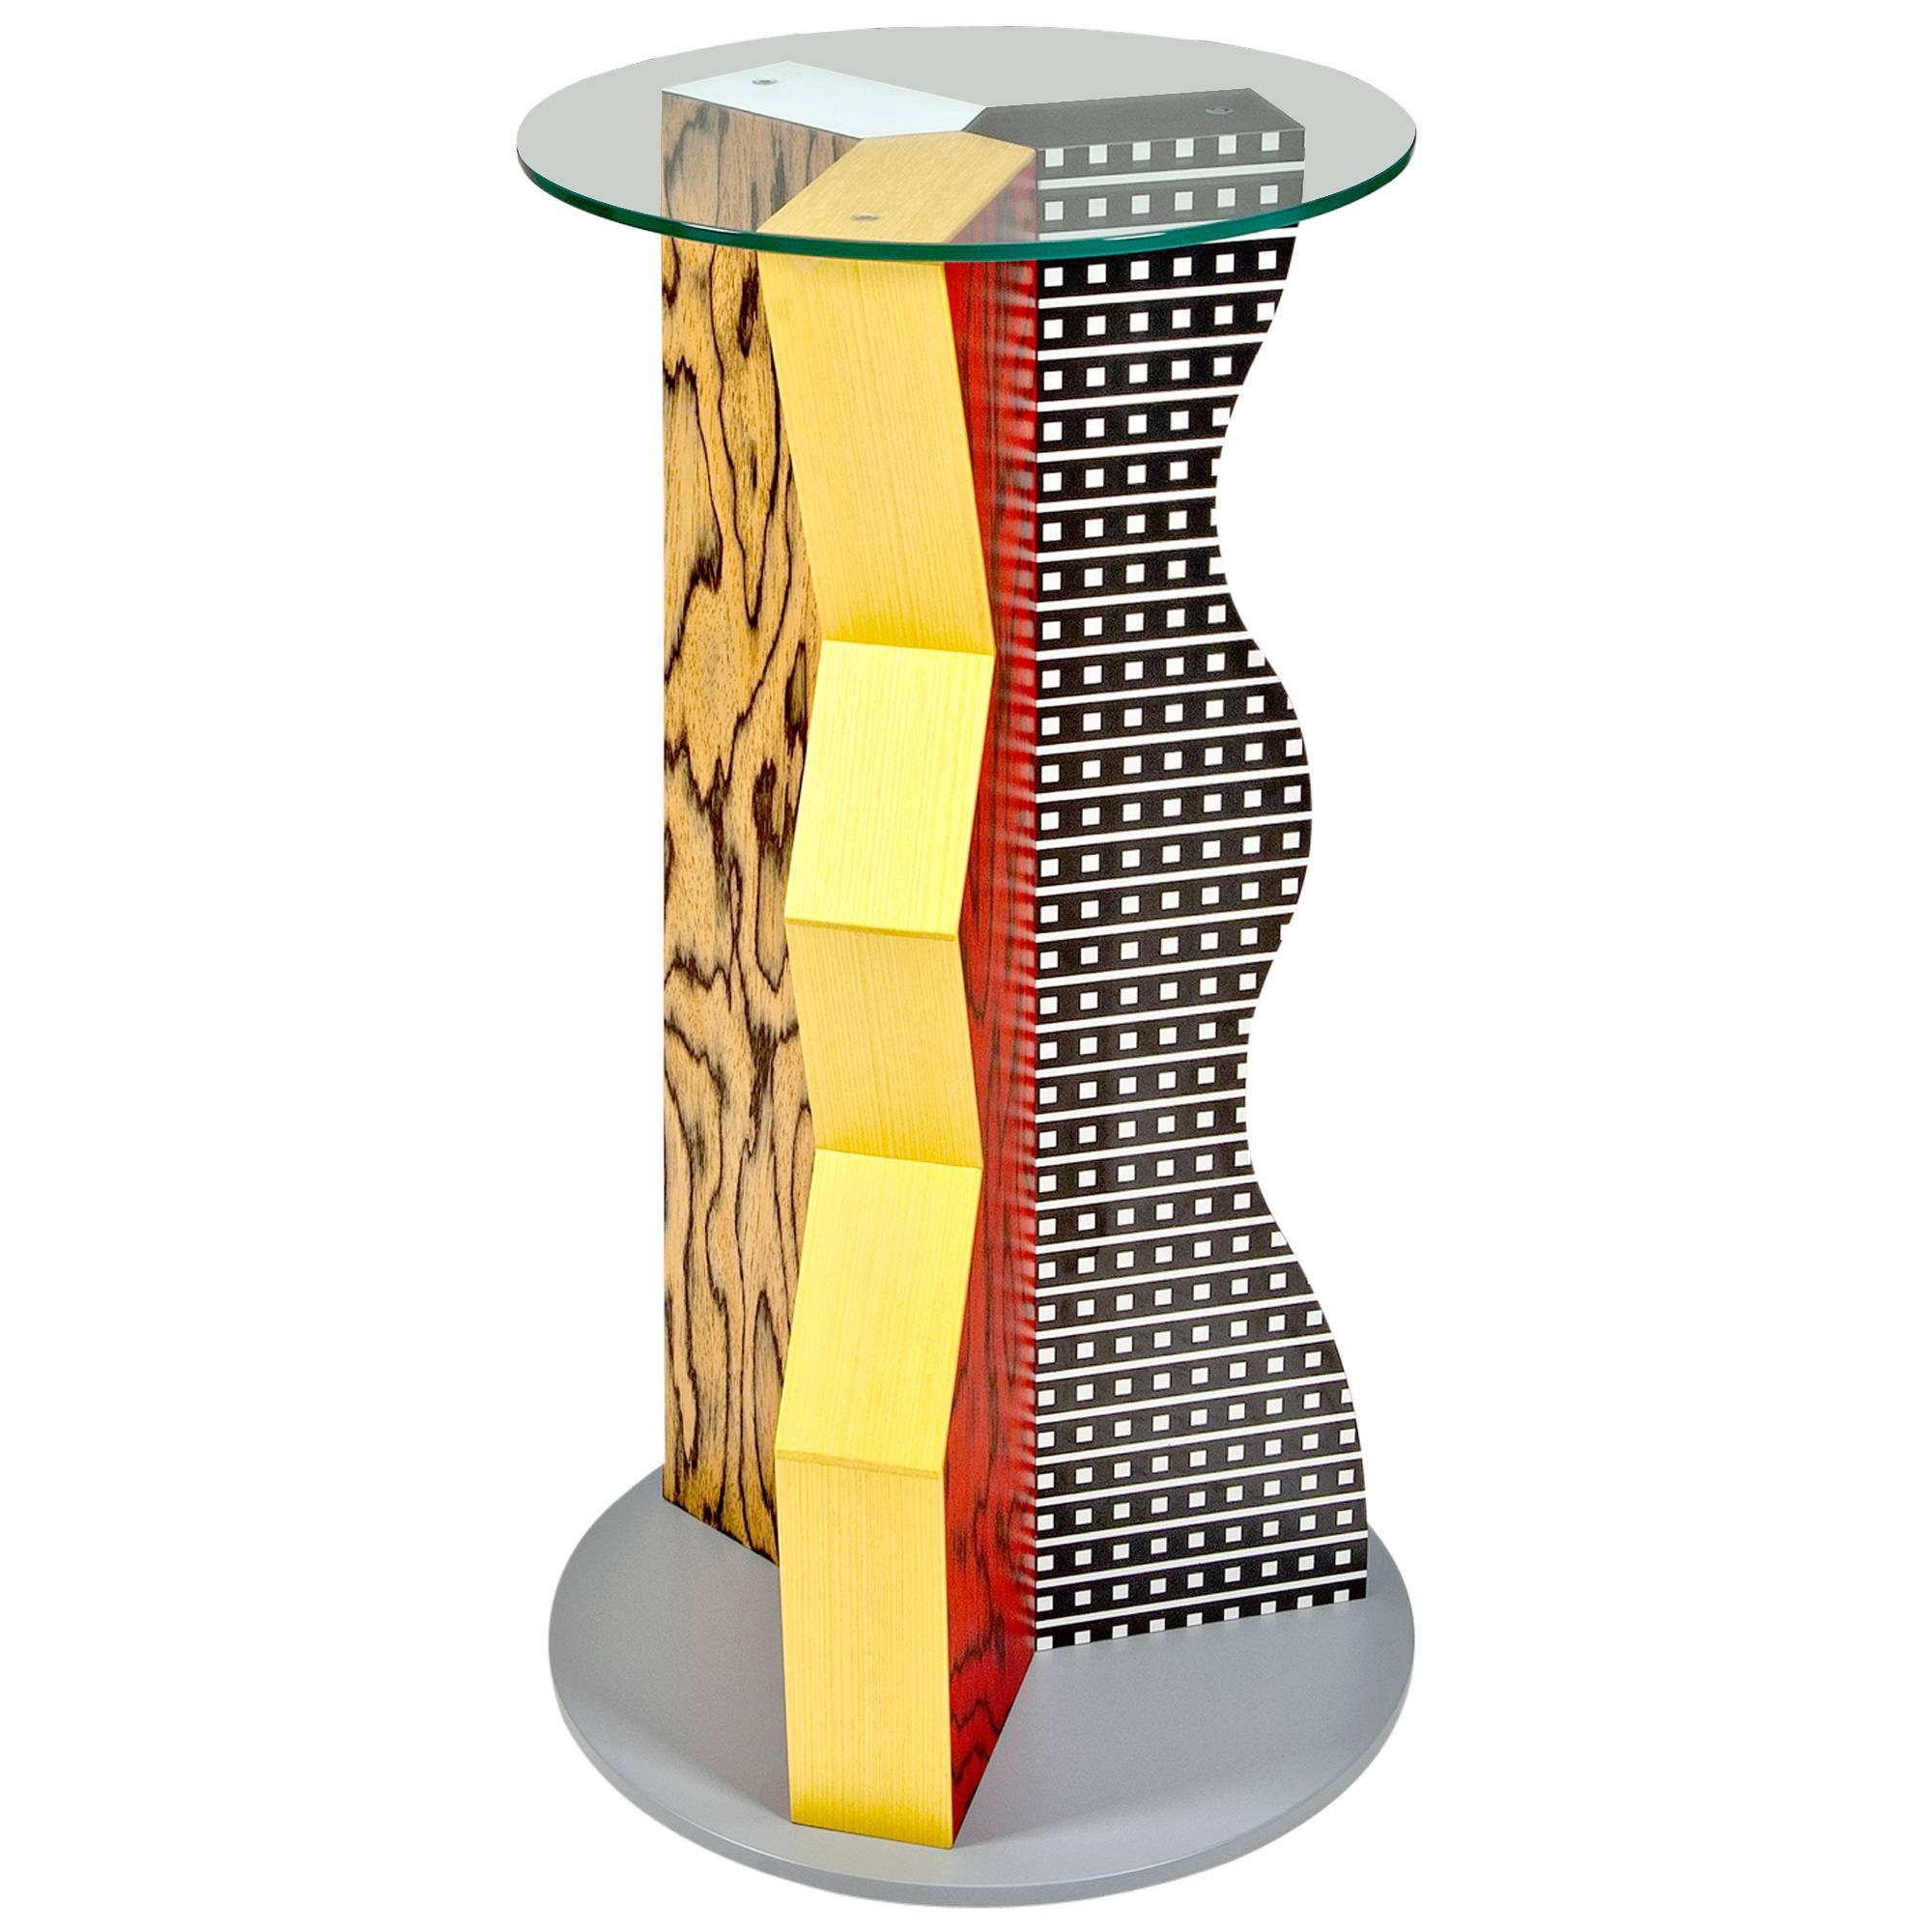 Ivory Pedestal by Ettore Sottsass for Memphis